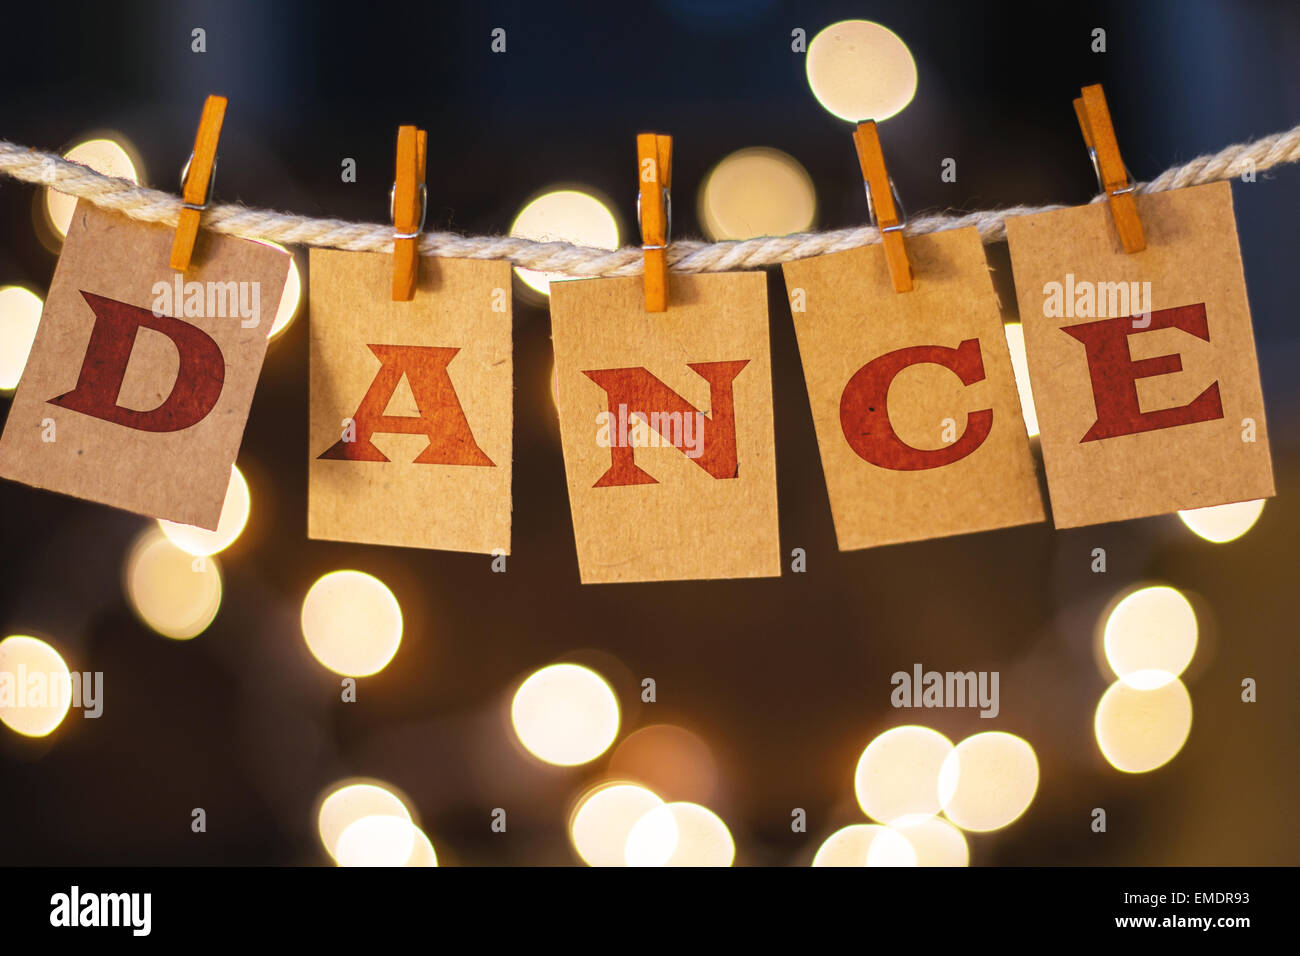 The word DANCE printed on clothespin clipped cards in front of defocused glowing lights. Stock Photo